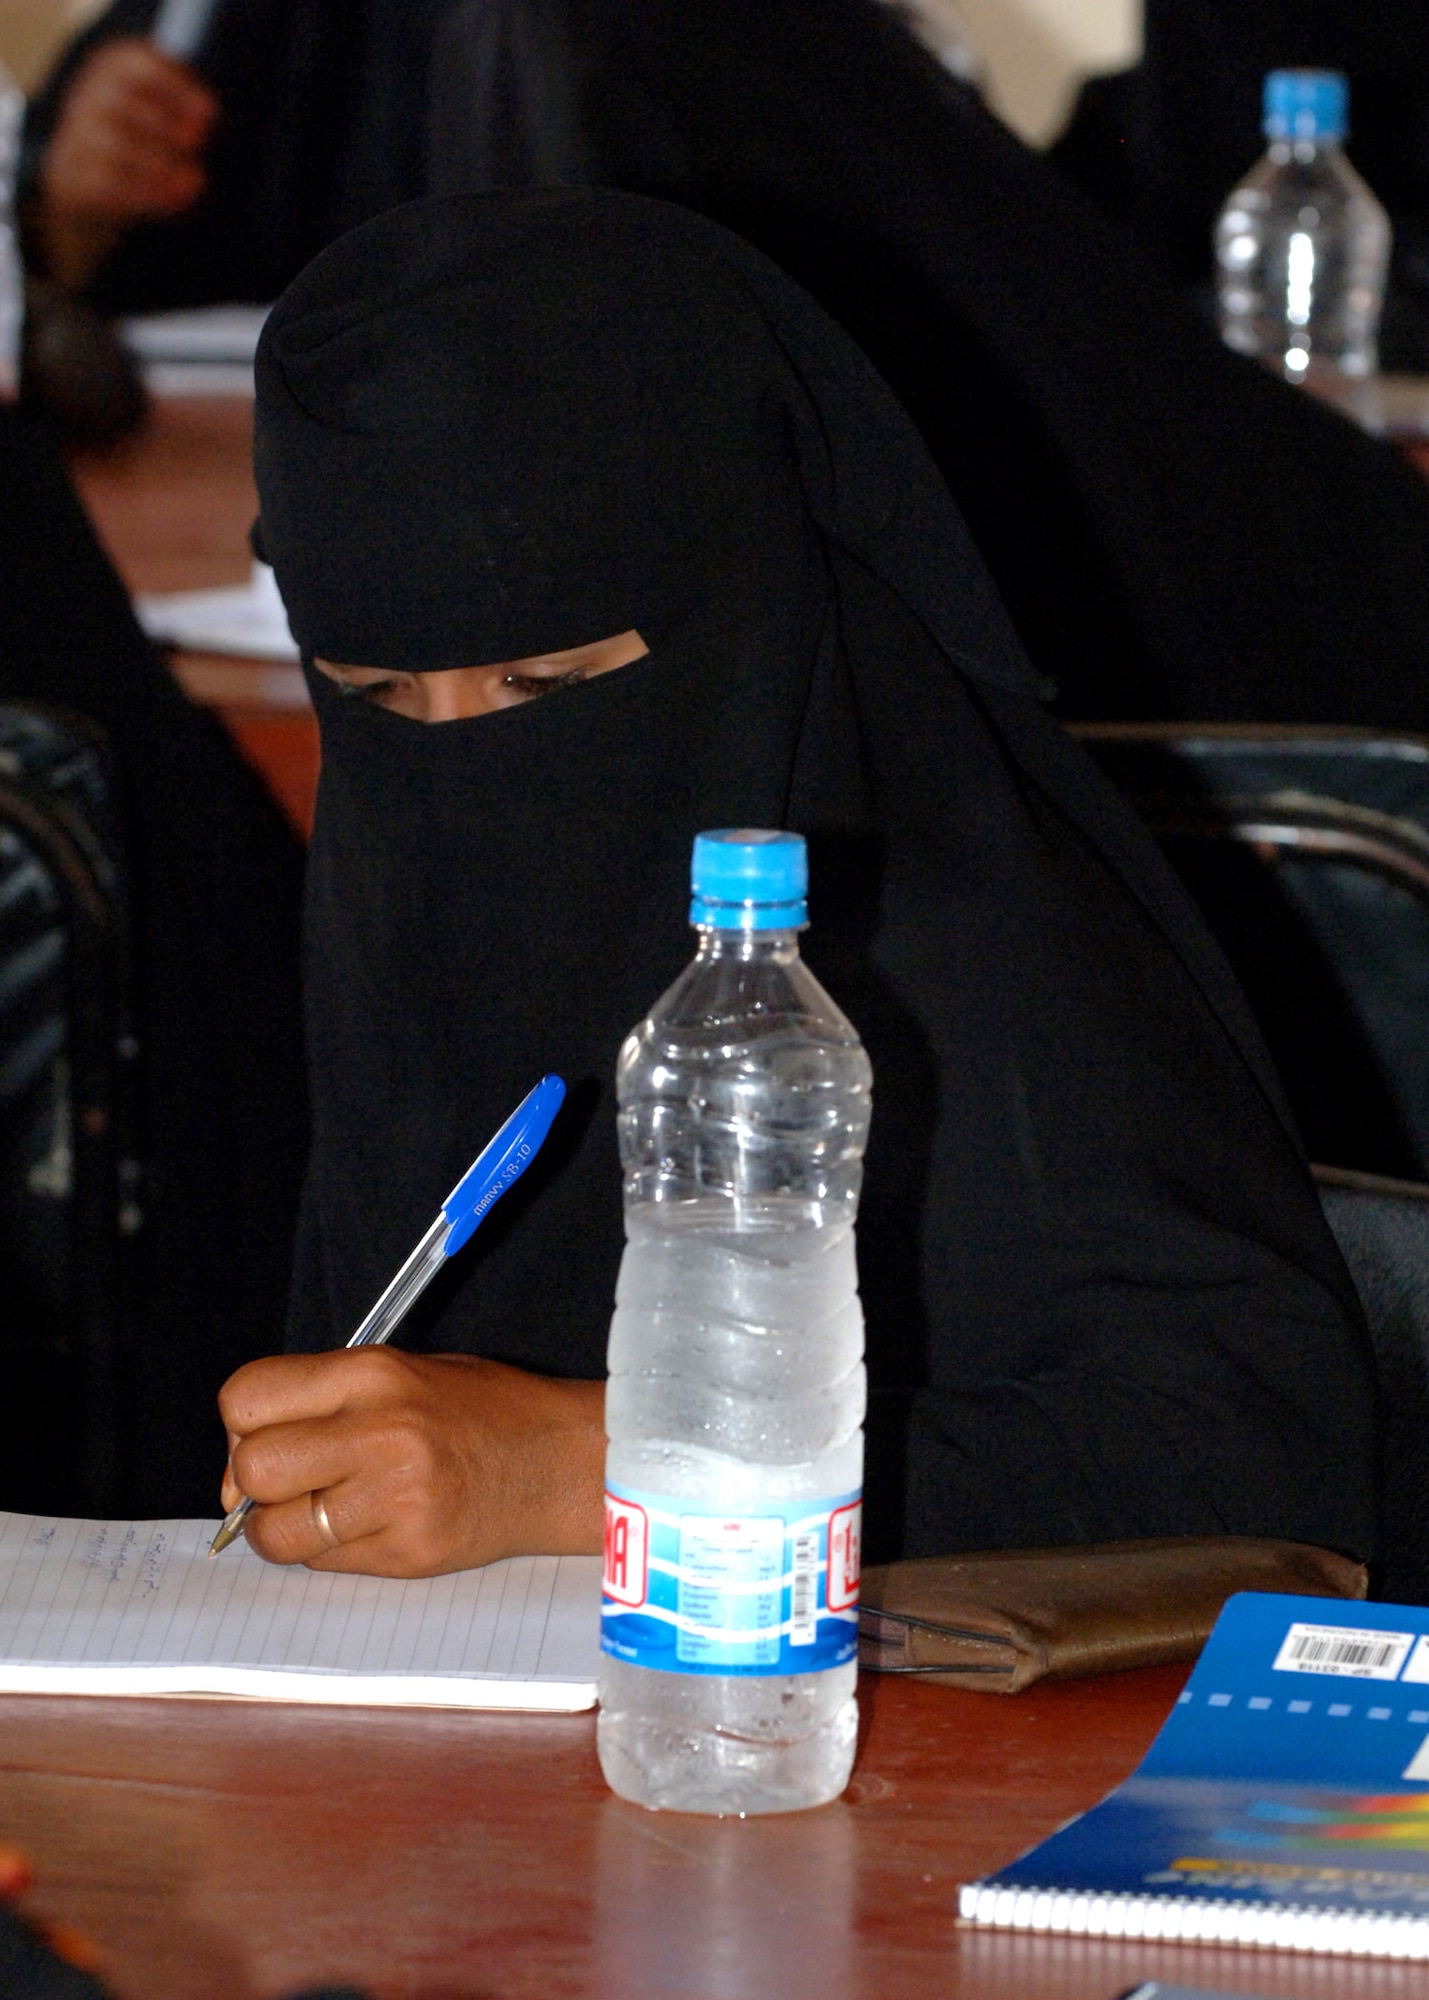 A Yemen animal health worker takes notes during a lecture as part of a Combined Joint Task Force-Horn of Africa veterinary civic action project on the small island of Socotra. The objective of the project was to teach women on the island basic animal husbandry techniques. Those learned skills will be used to improve the country's overall livestock health and productivity, as well as educate others villagers. (U.S. Air Force photo/Tech. Sgt. Carrie Bernard) 